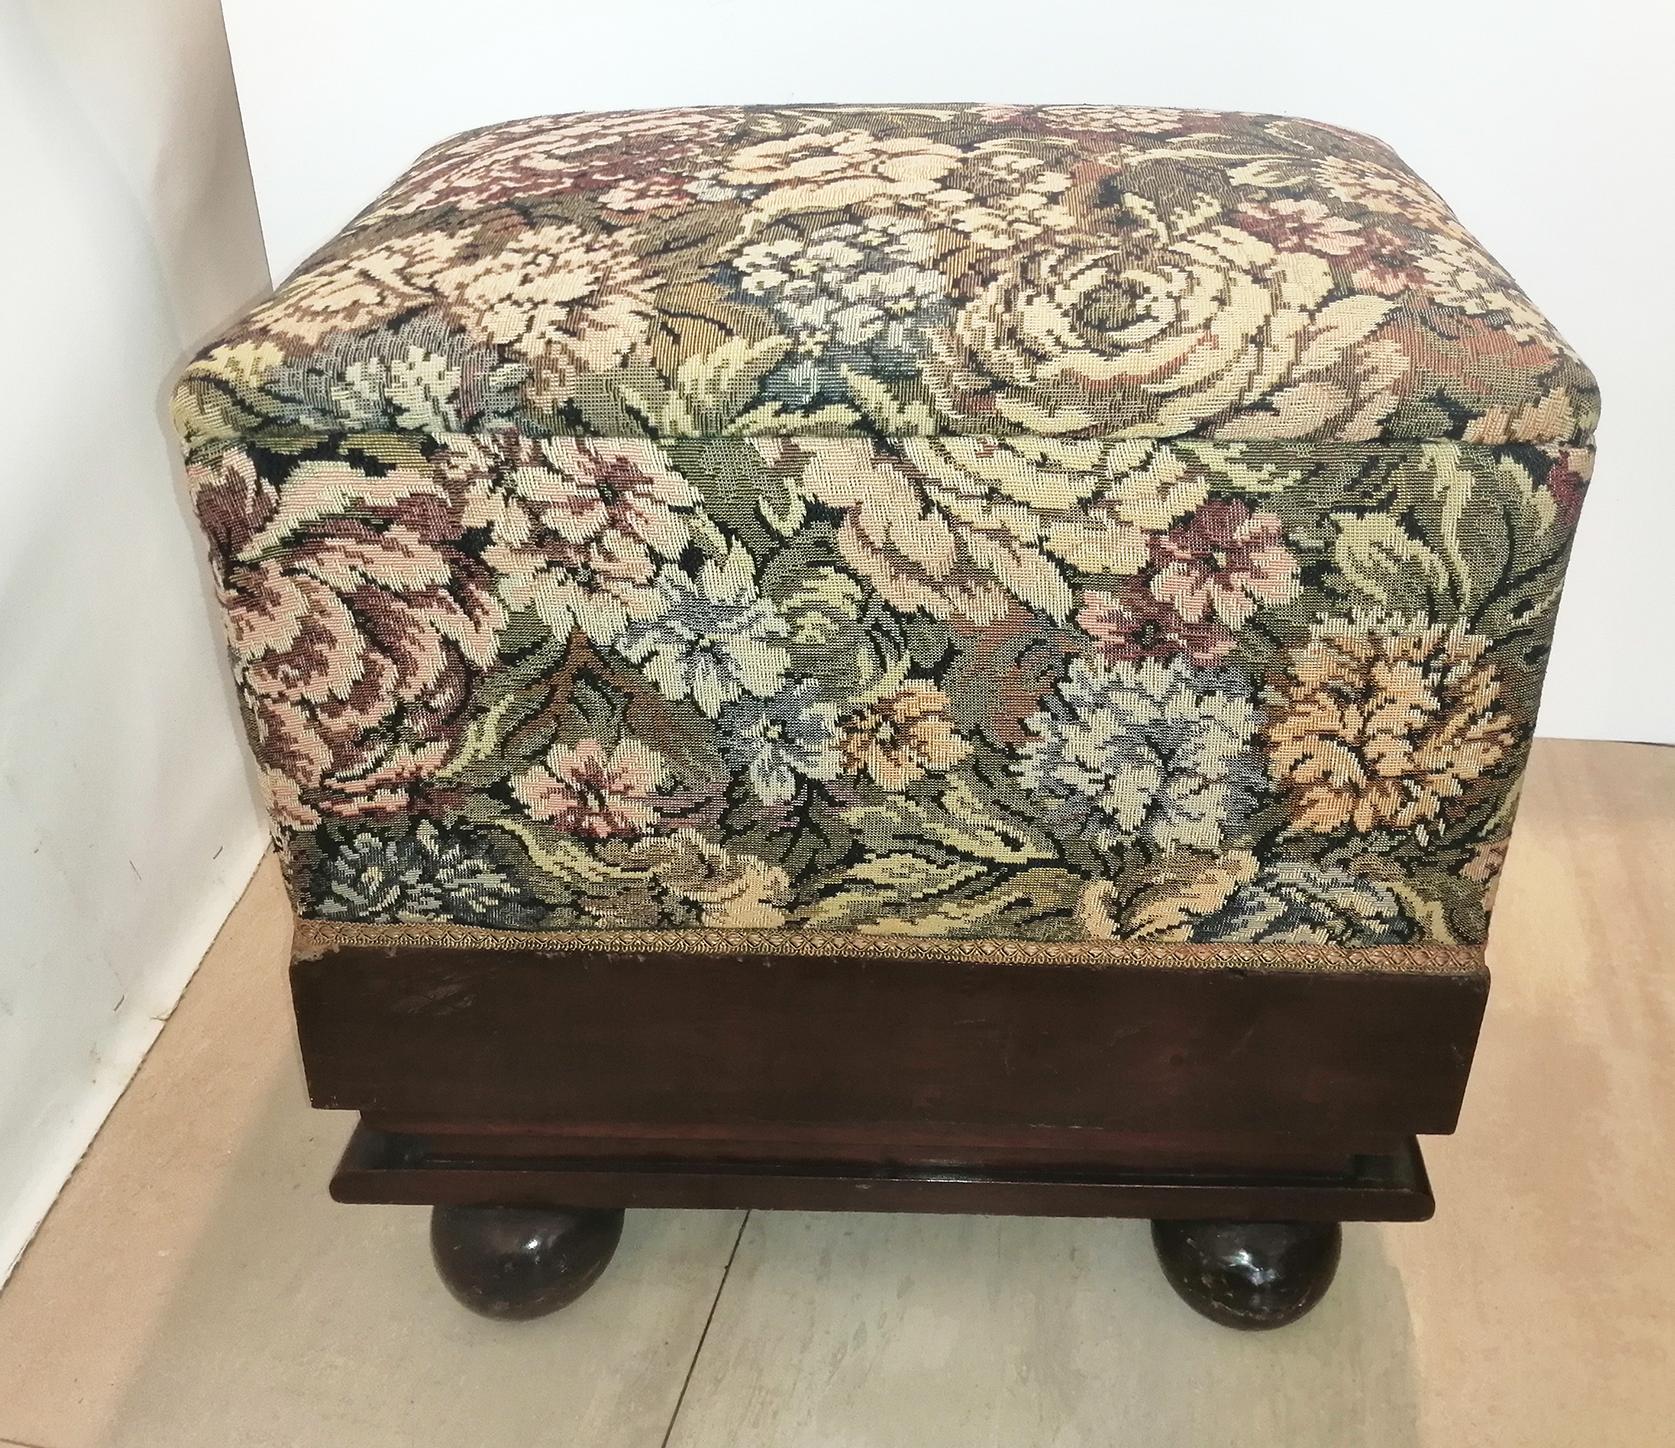 This stool is in excellent condition.

The Needlepoint fabric does not seem very old, it is in perfect condition to use

The seat itself is firm and is very comfortable to sit on or rest your feet. The upholstery is clean and free from any wear,